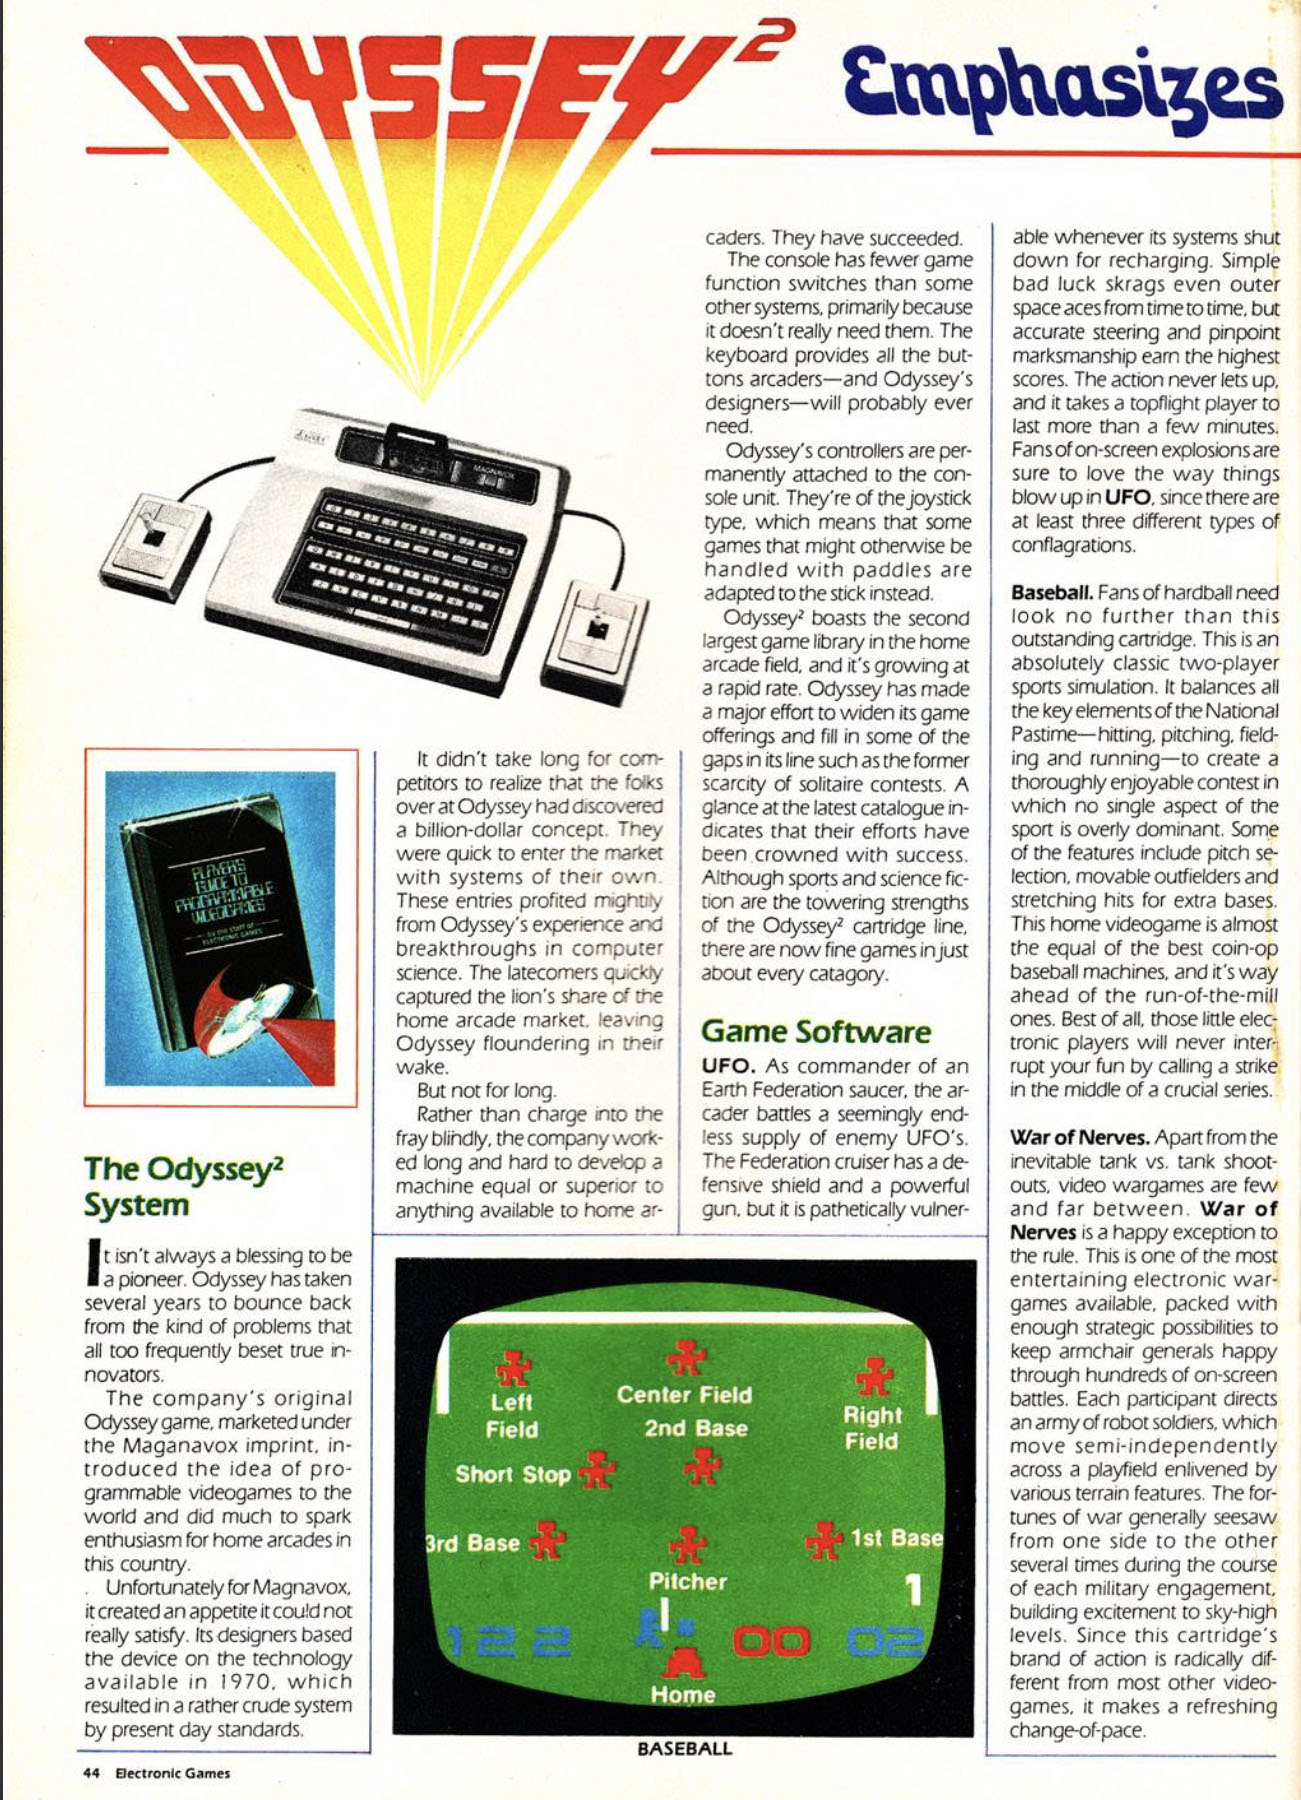 Odyssey2 Emphasizes Sports and Science Fiction, Electronic Games Winter 1981 page 44